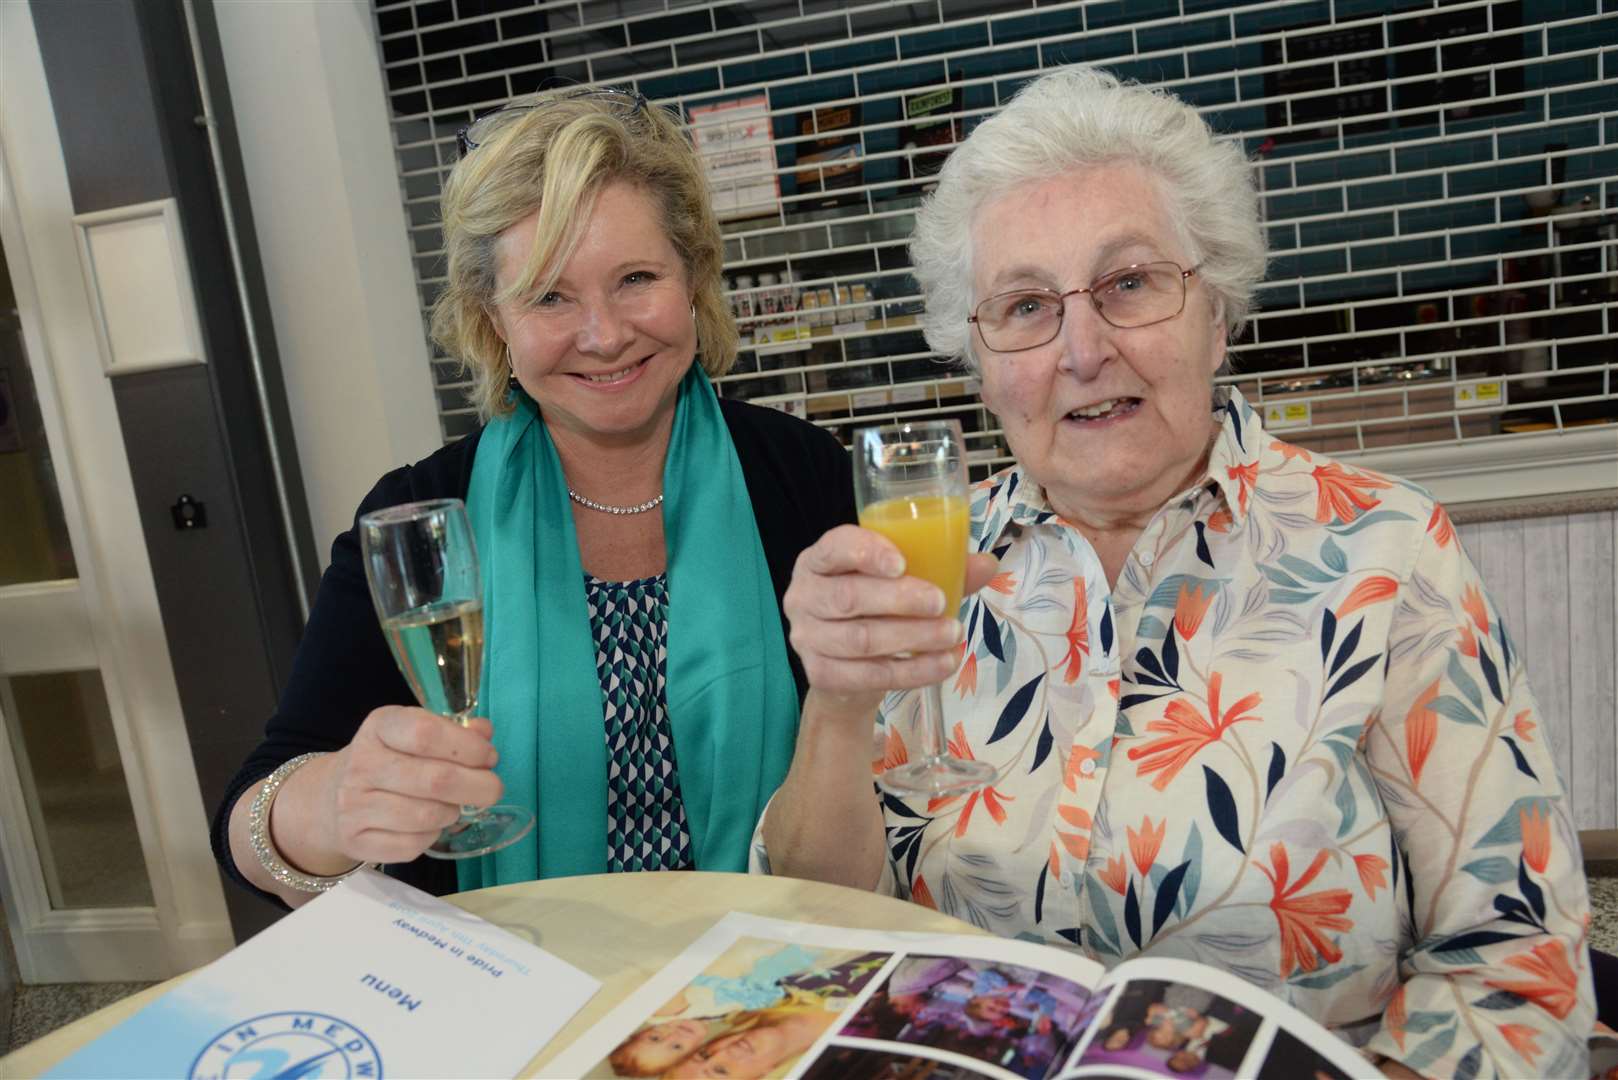 Shannon Griffin and Eunice Norman at the Pride in Medway Awards held at Mid Kent College. Picture: Chris Davey